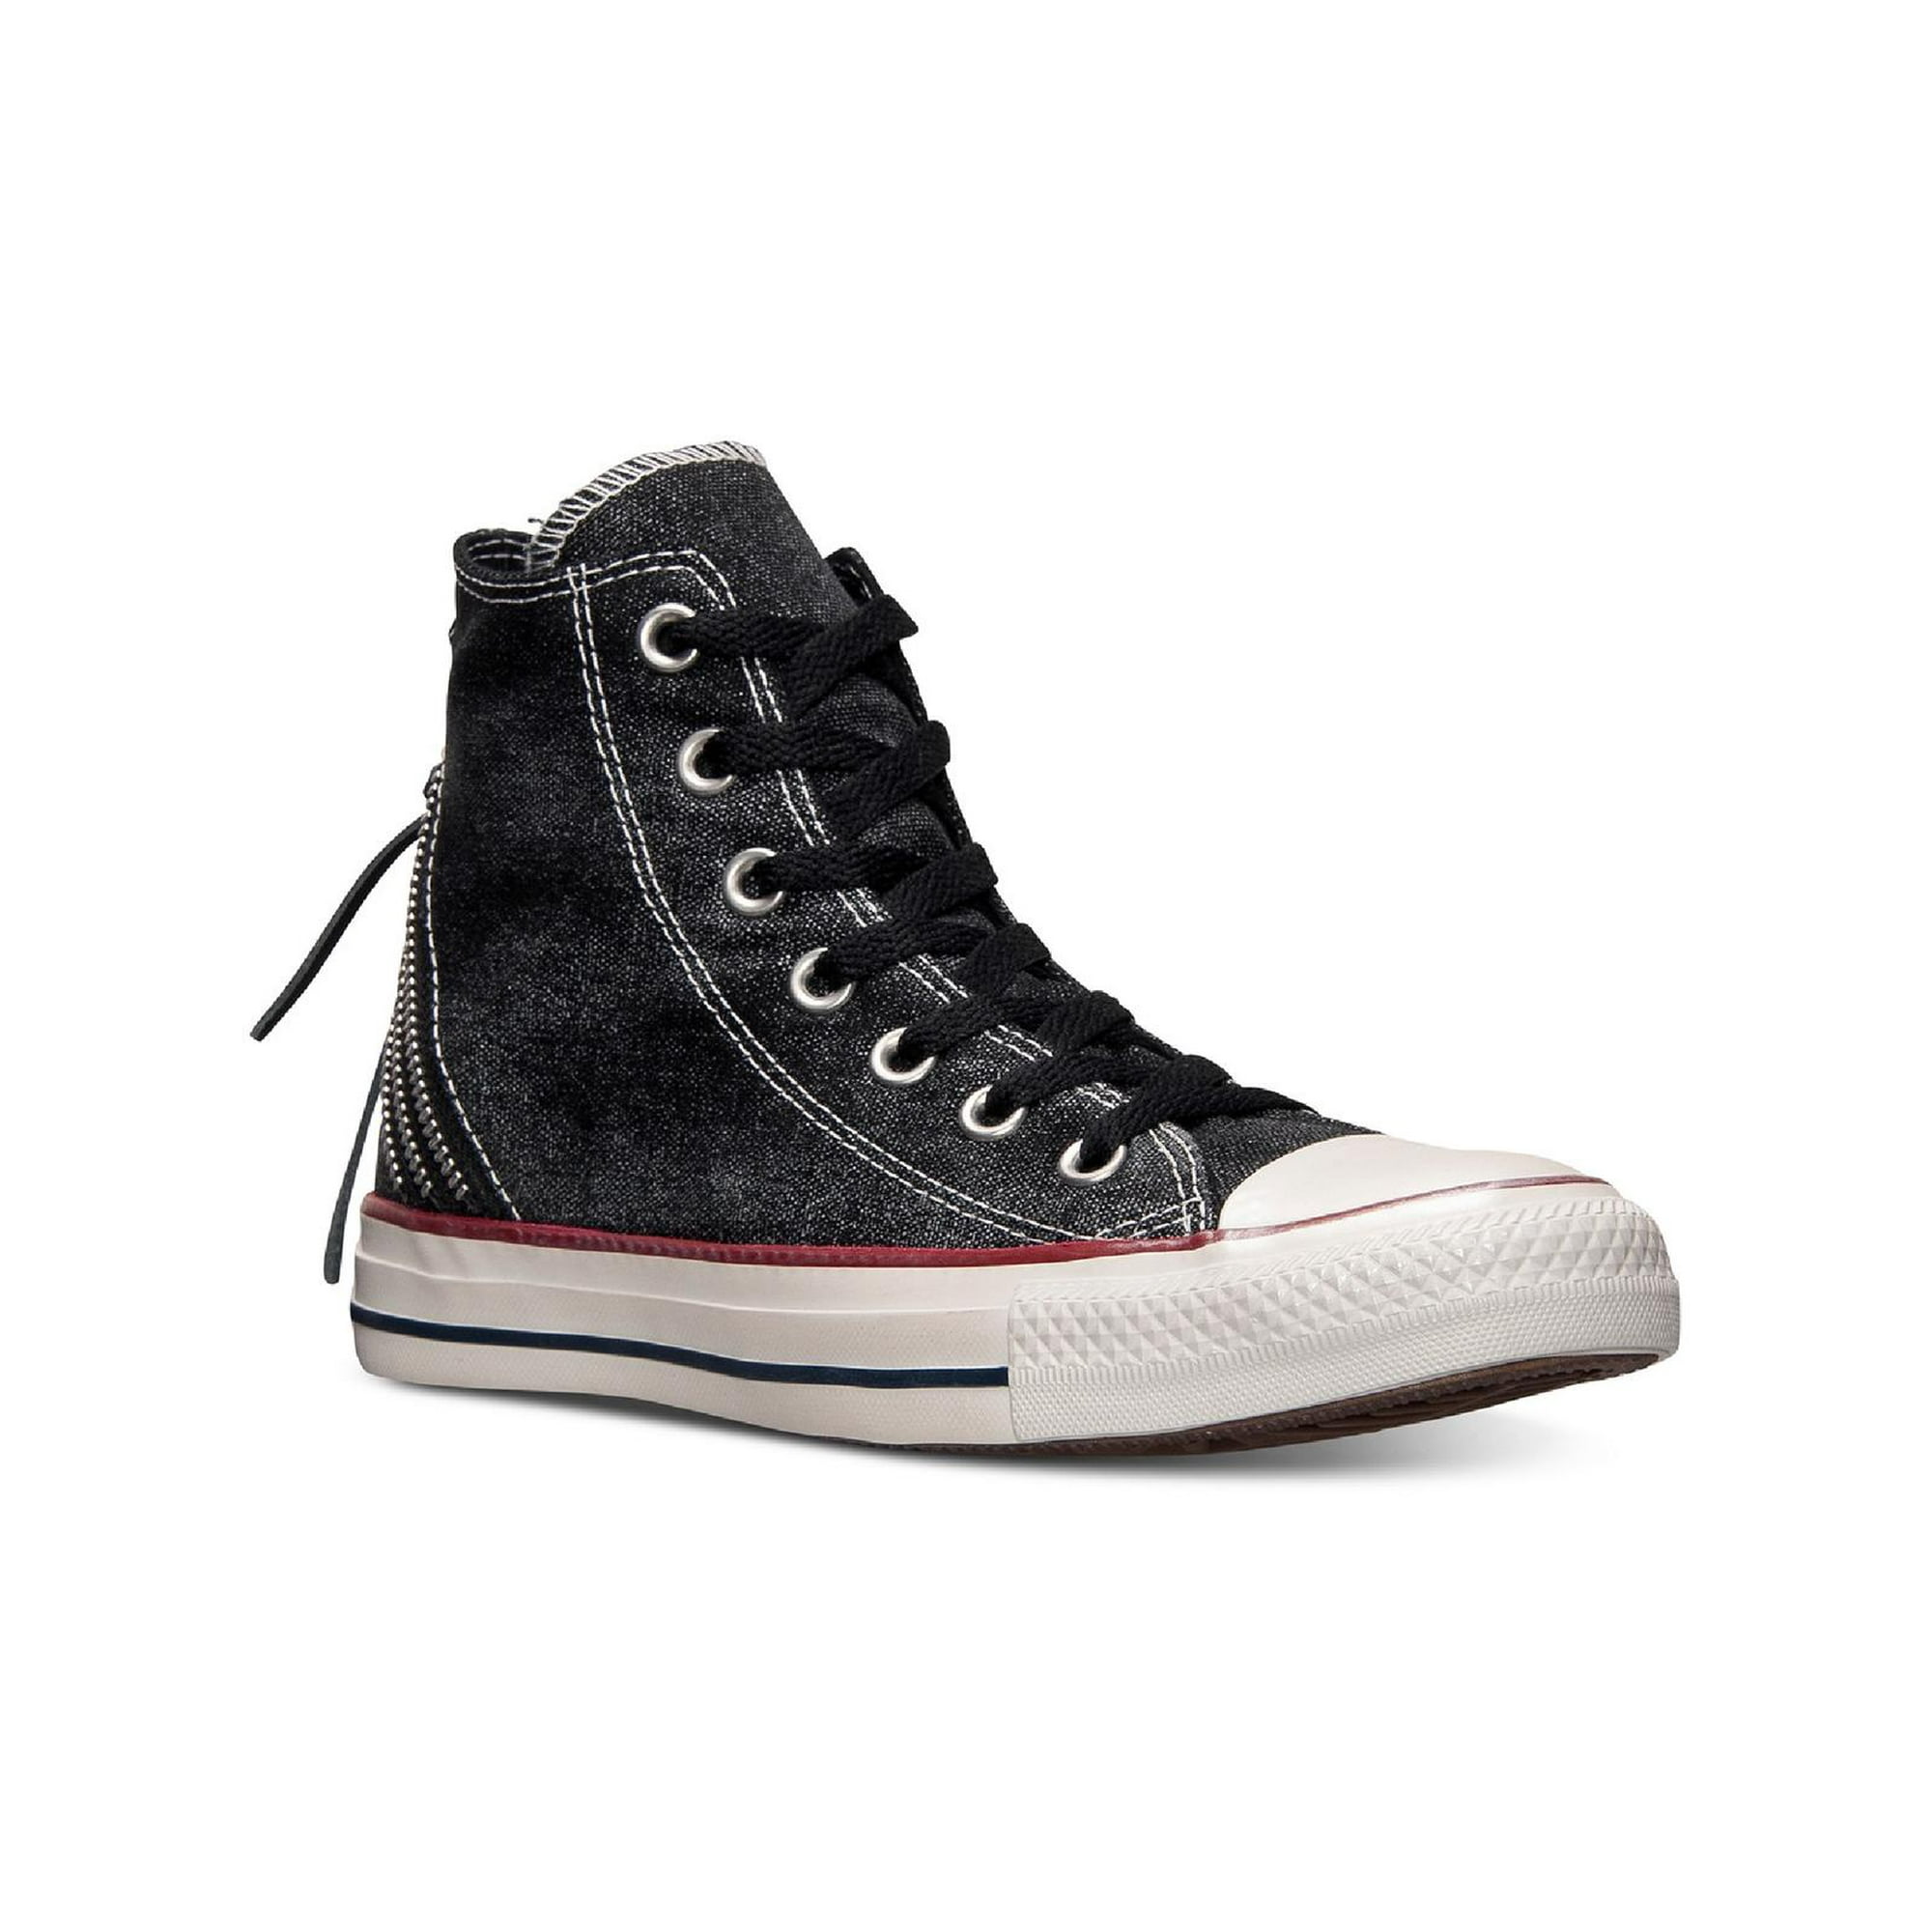 Converse Tri Zip Wash Women's Canvas Lace Up High Sneakers -